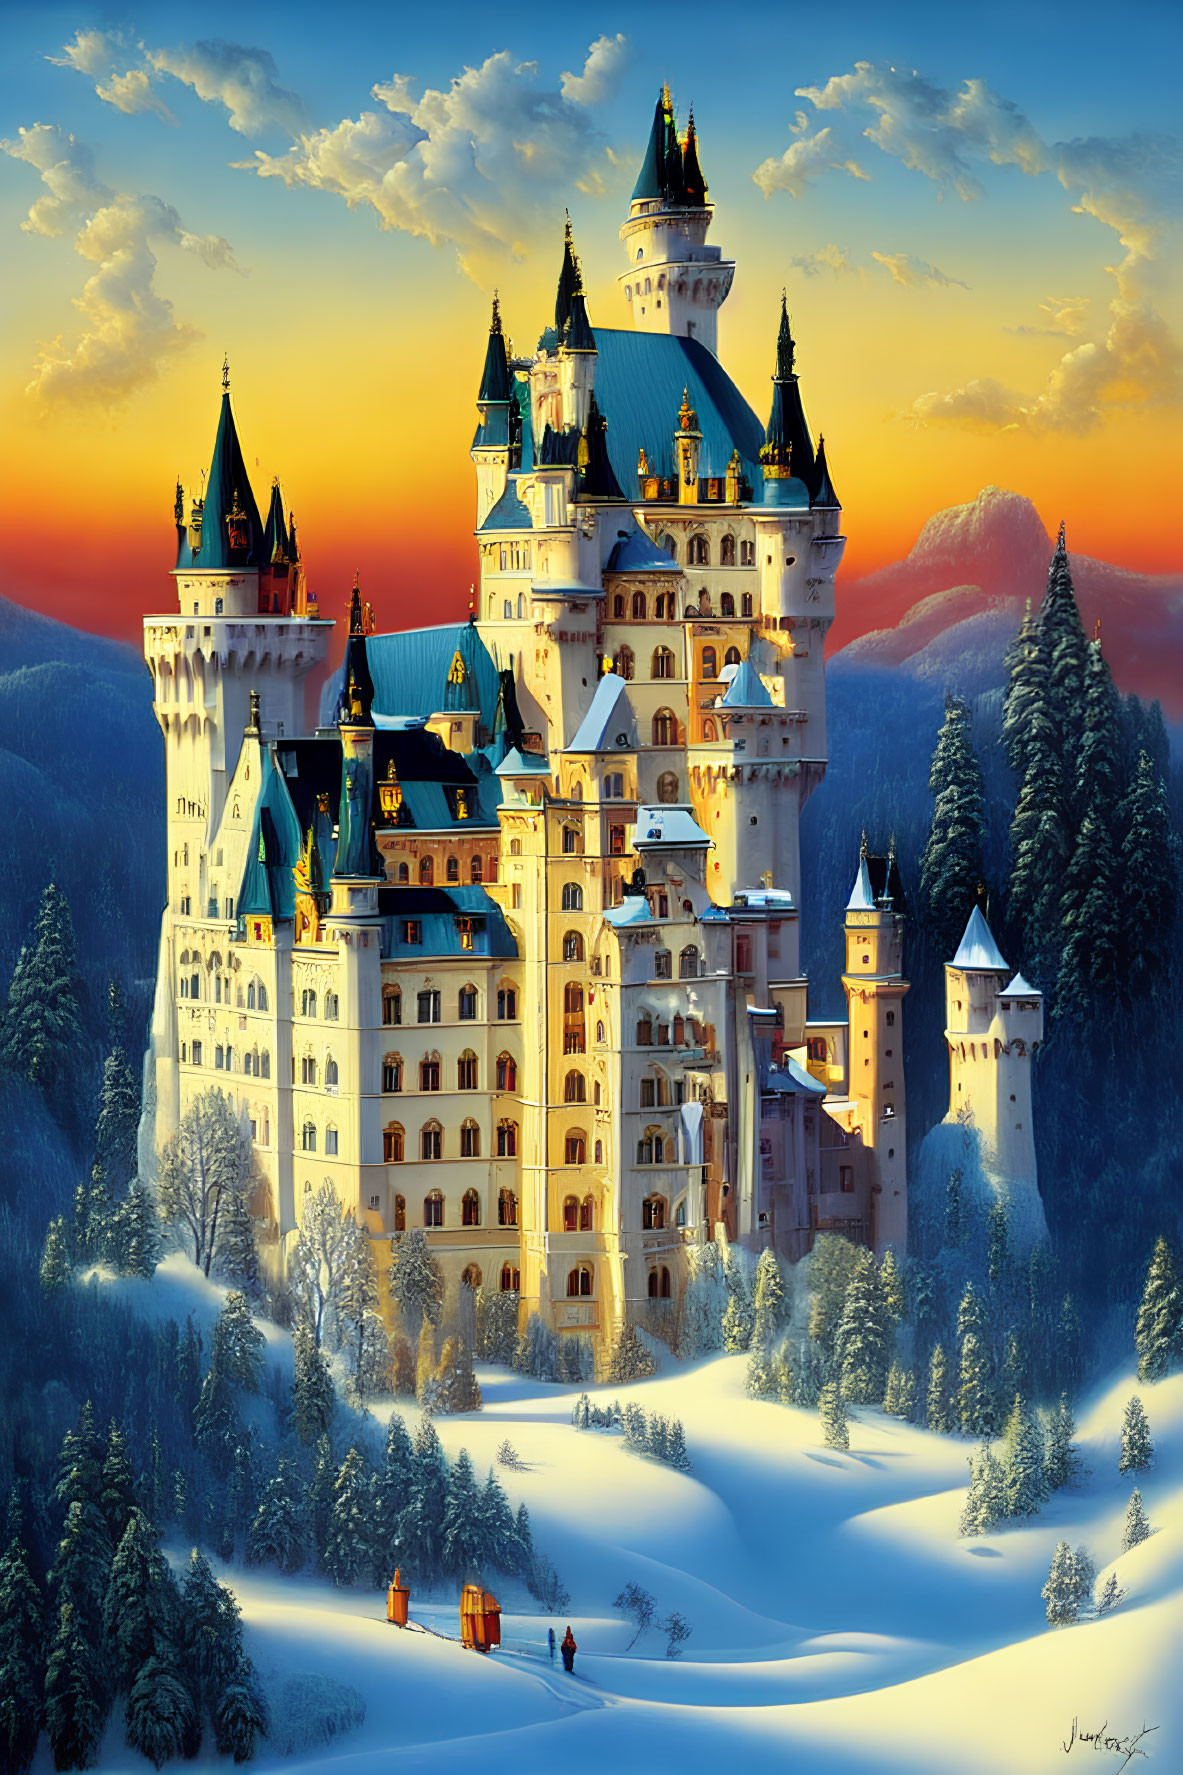 Snowy landscape with enchanting castle and vibrant sunset sky